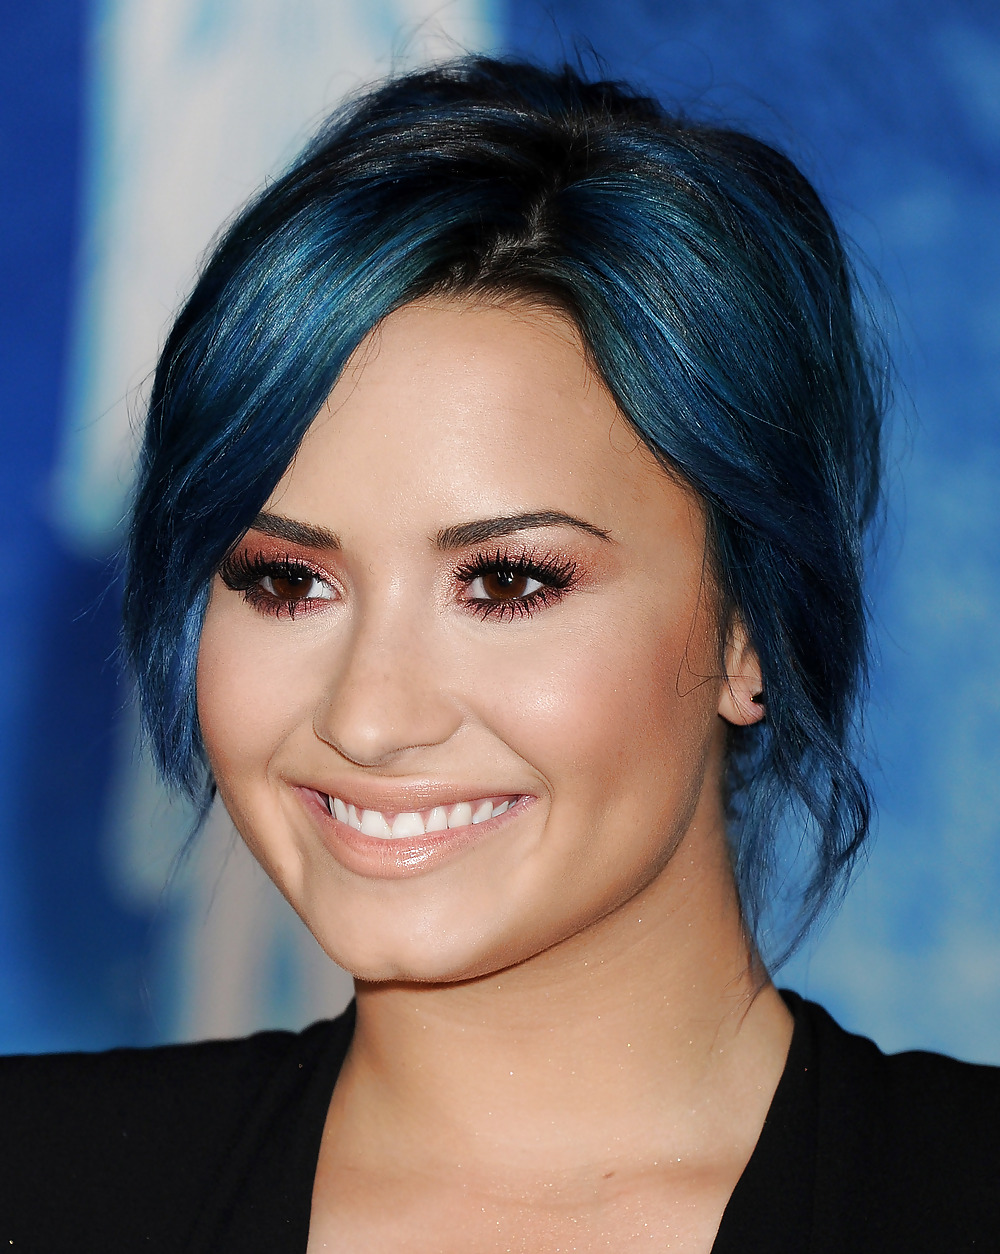 Demi Lovato with blue hair and business style #22180136